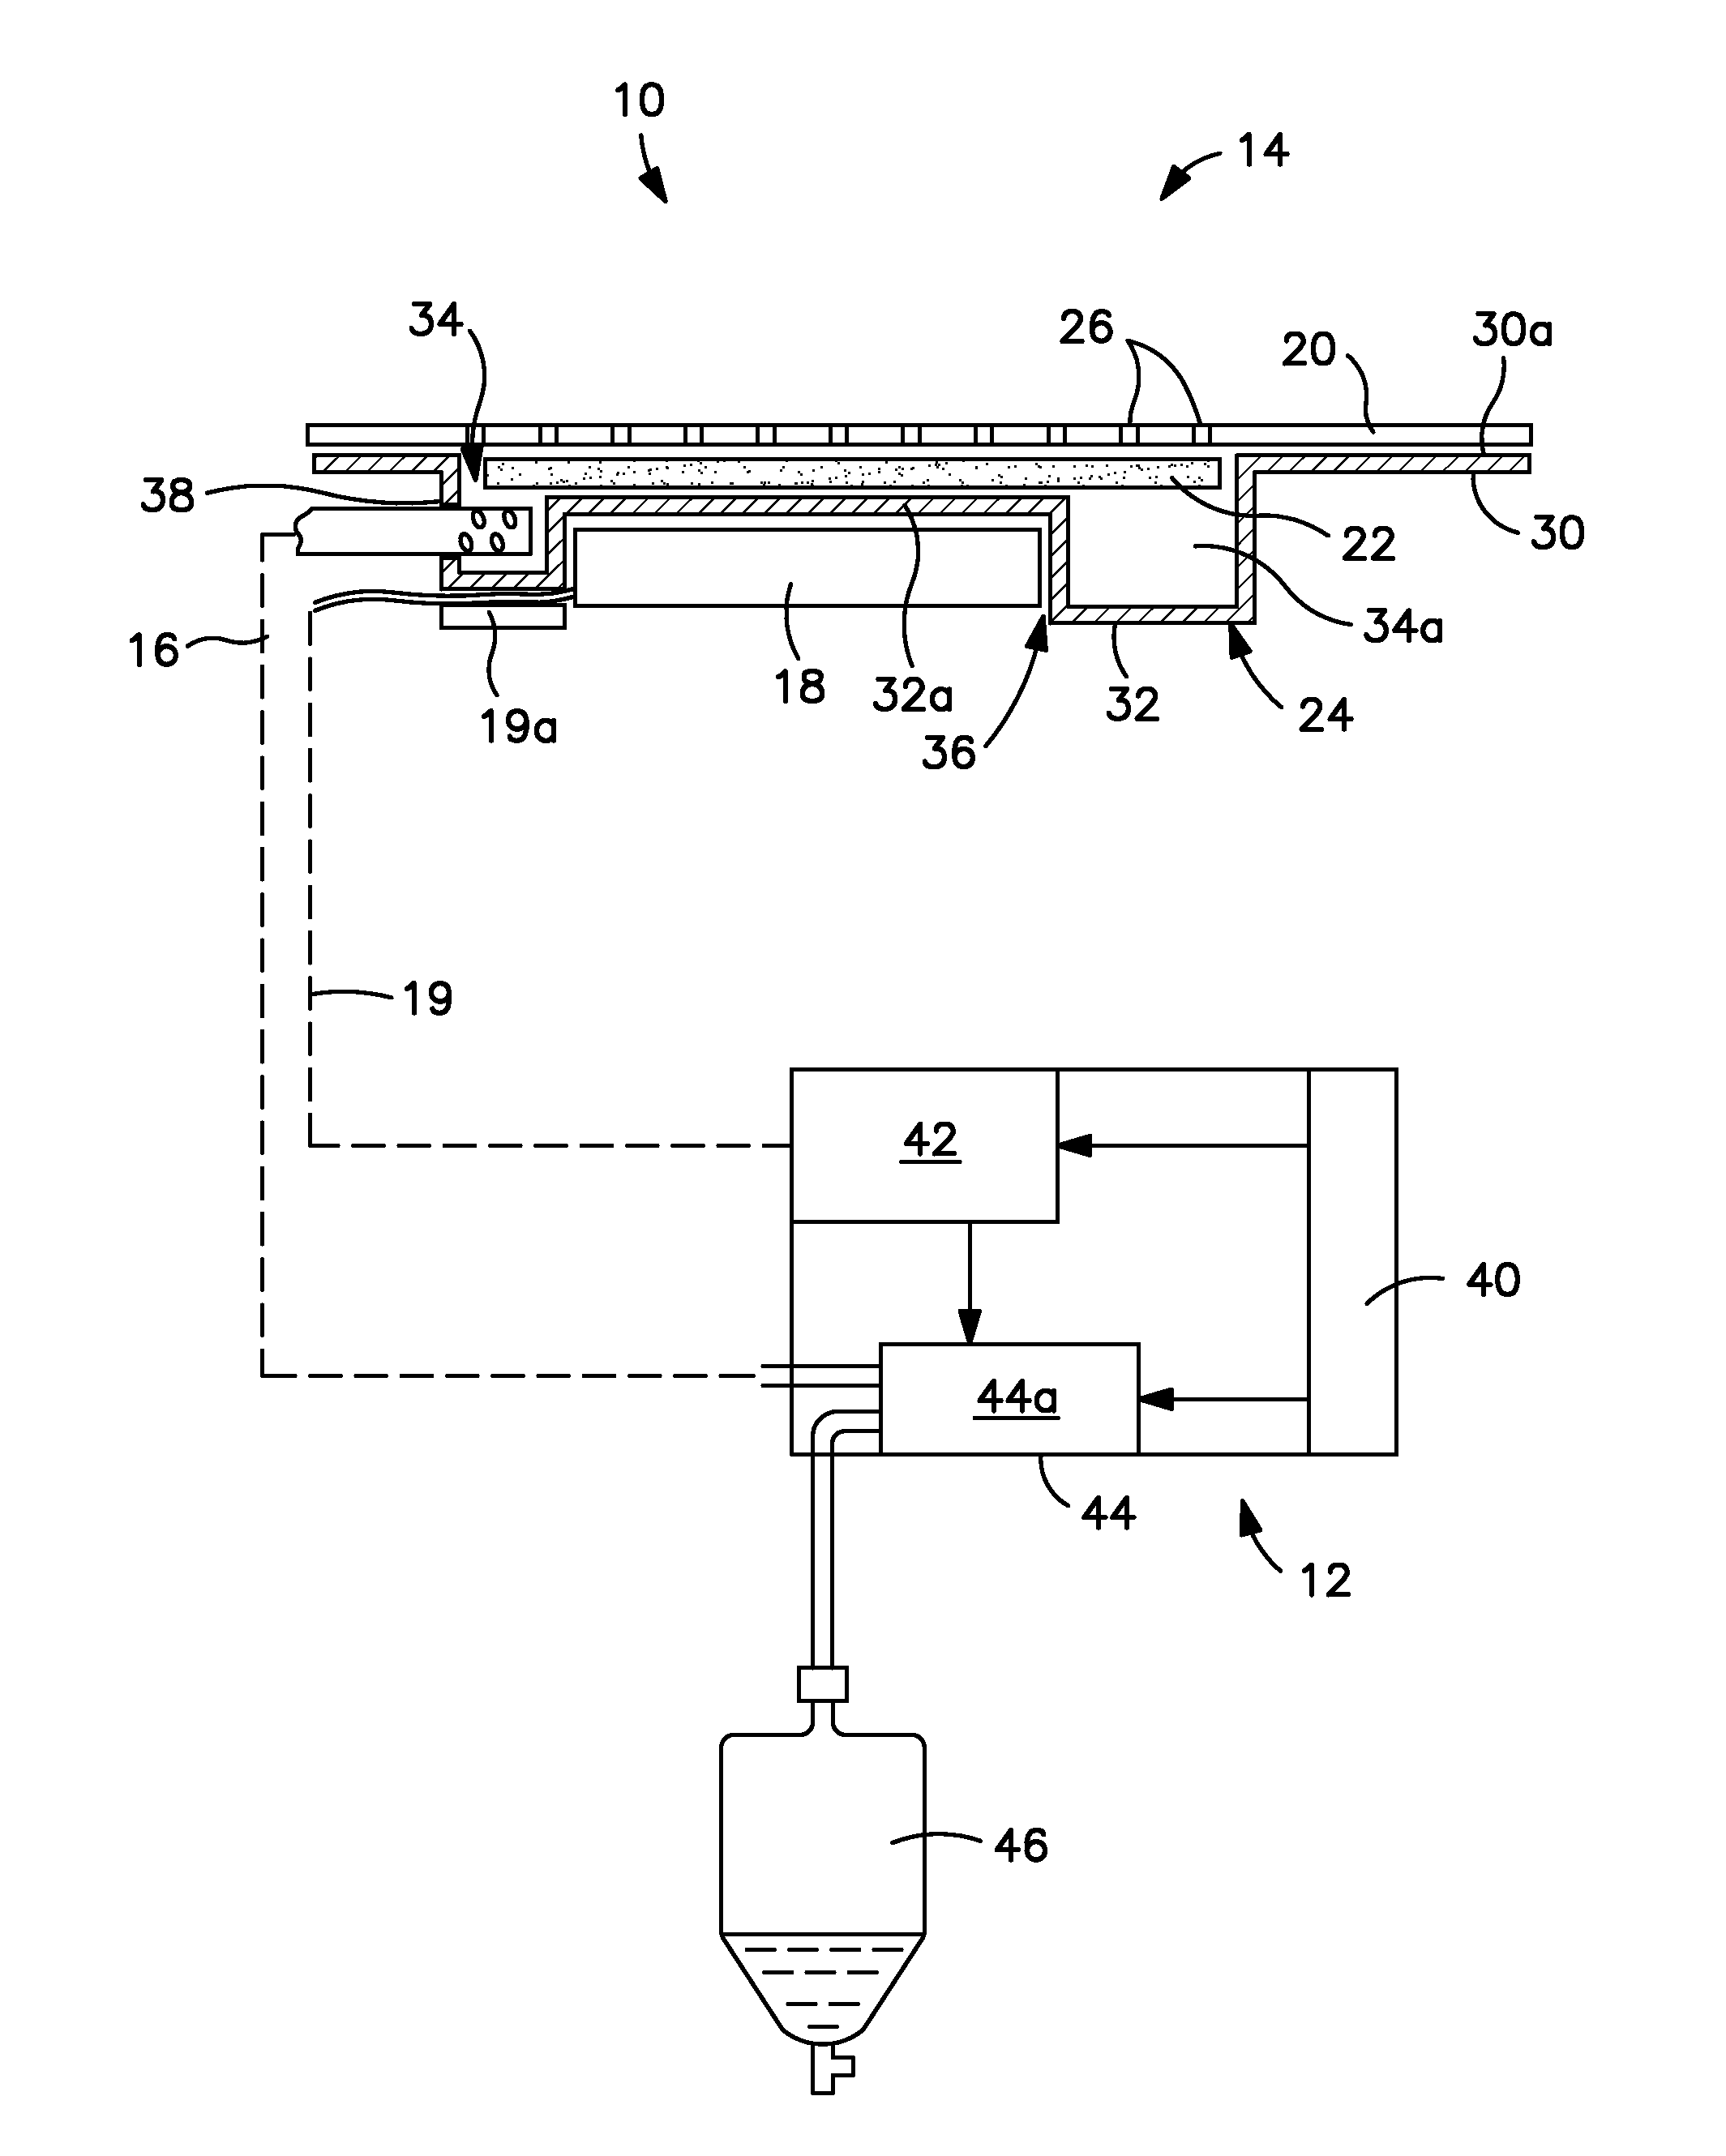 Aspiration system and body interface device for removing urine discharged by the human body